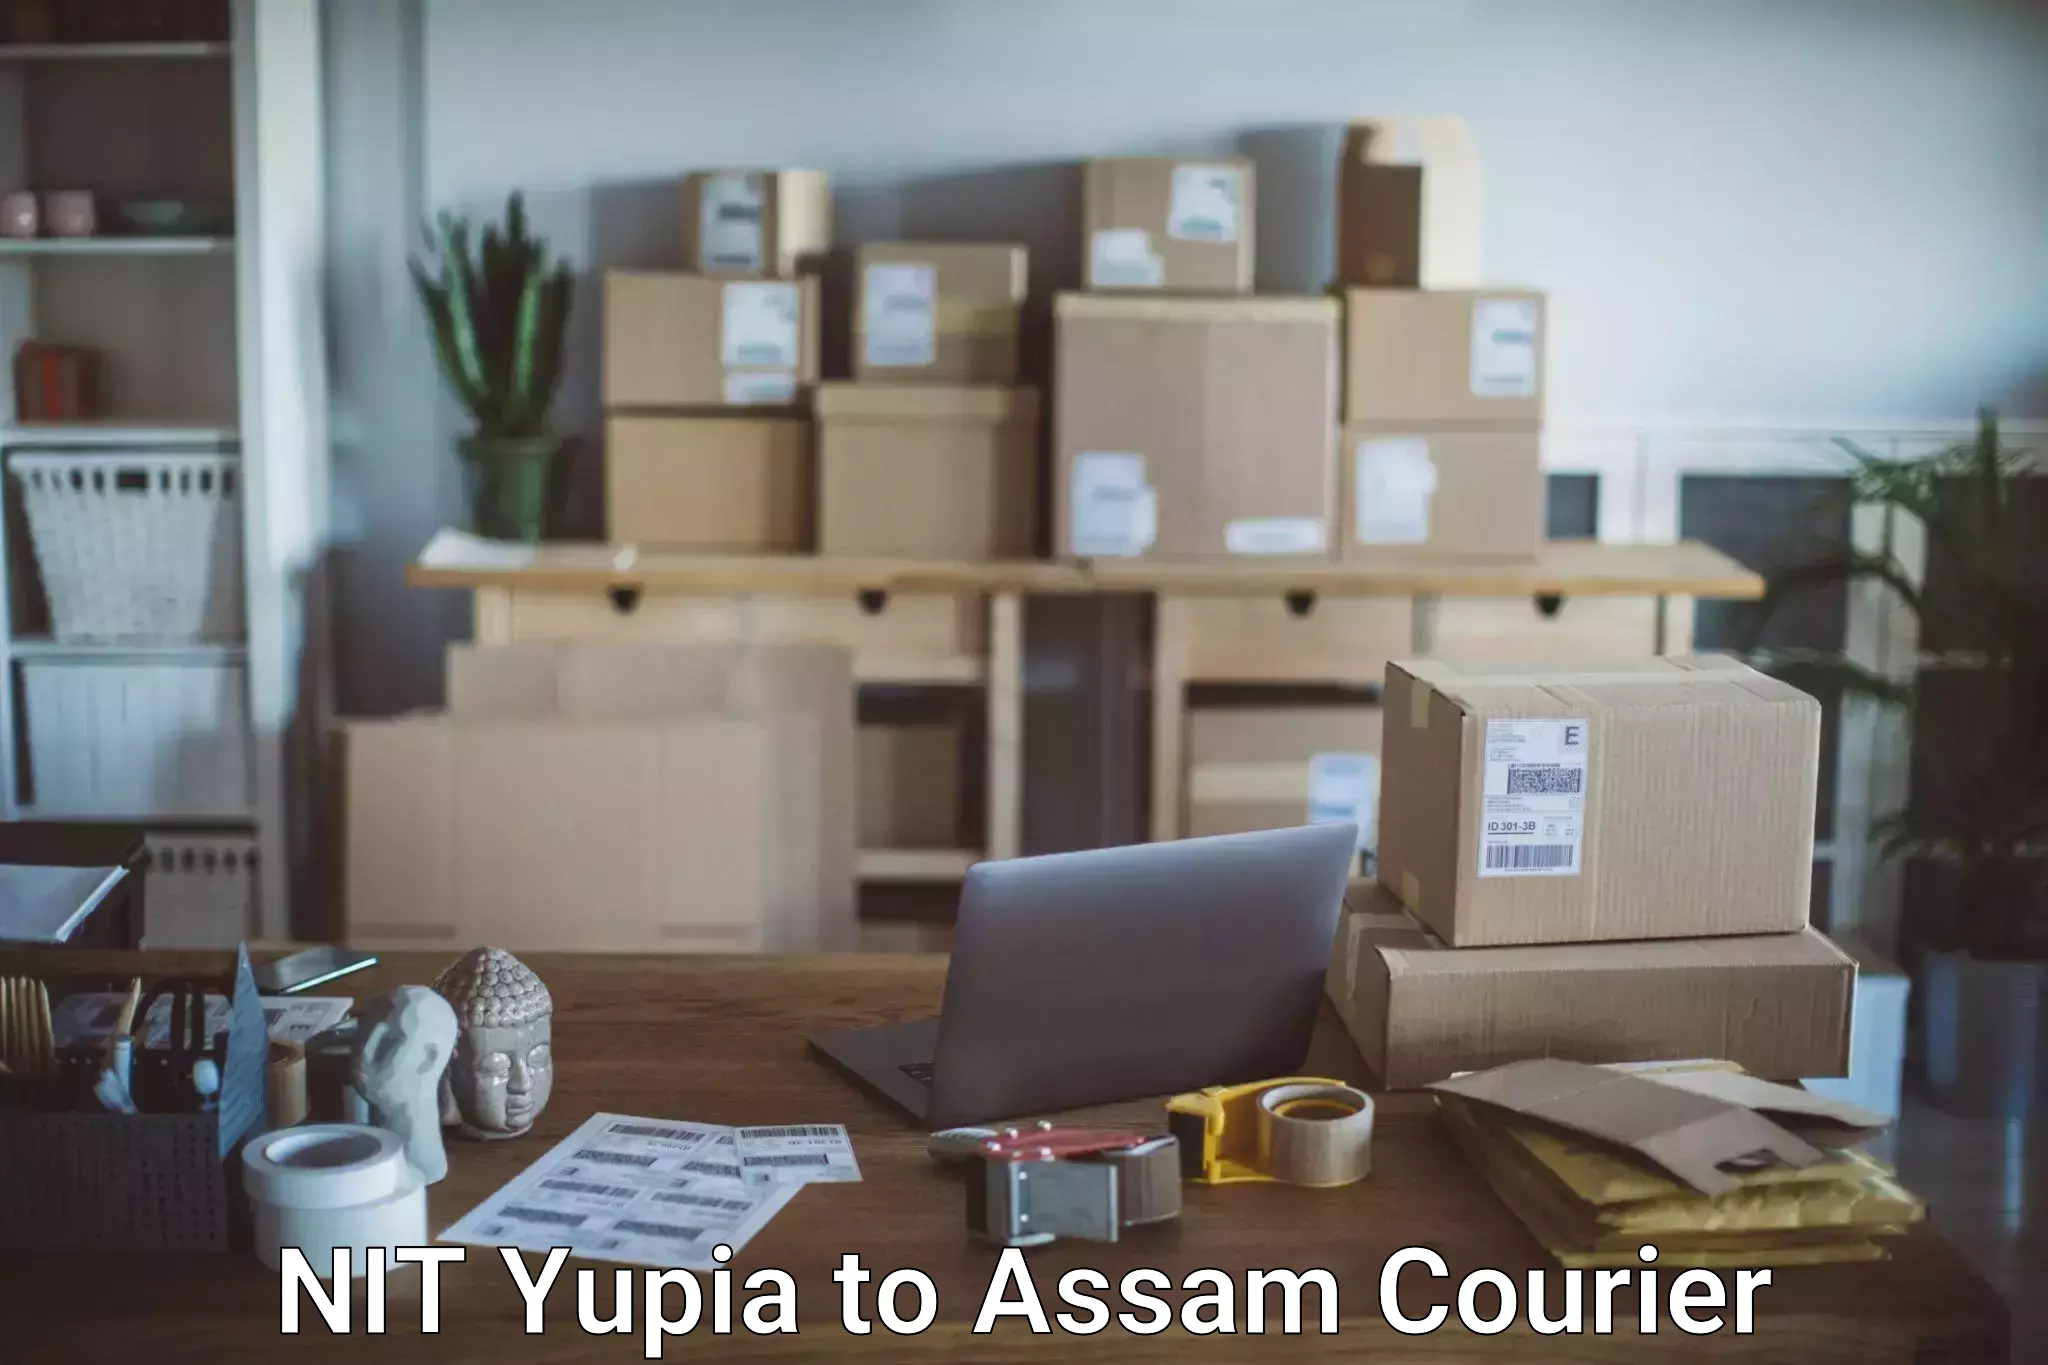 Online luggage shipping in NIT Yupia to Kampur